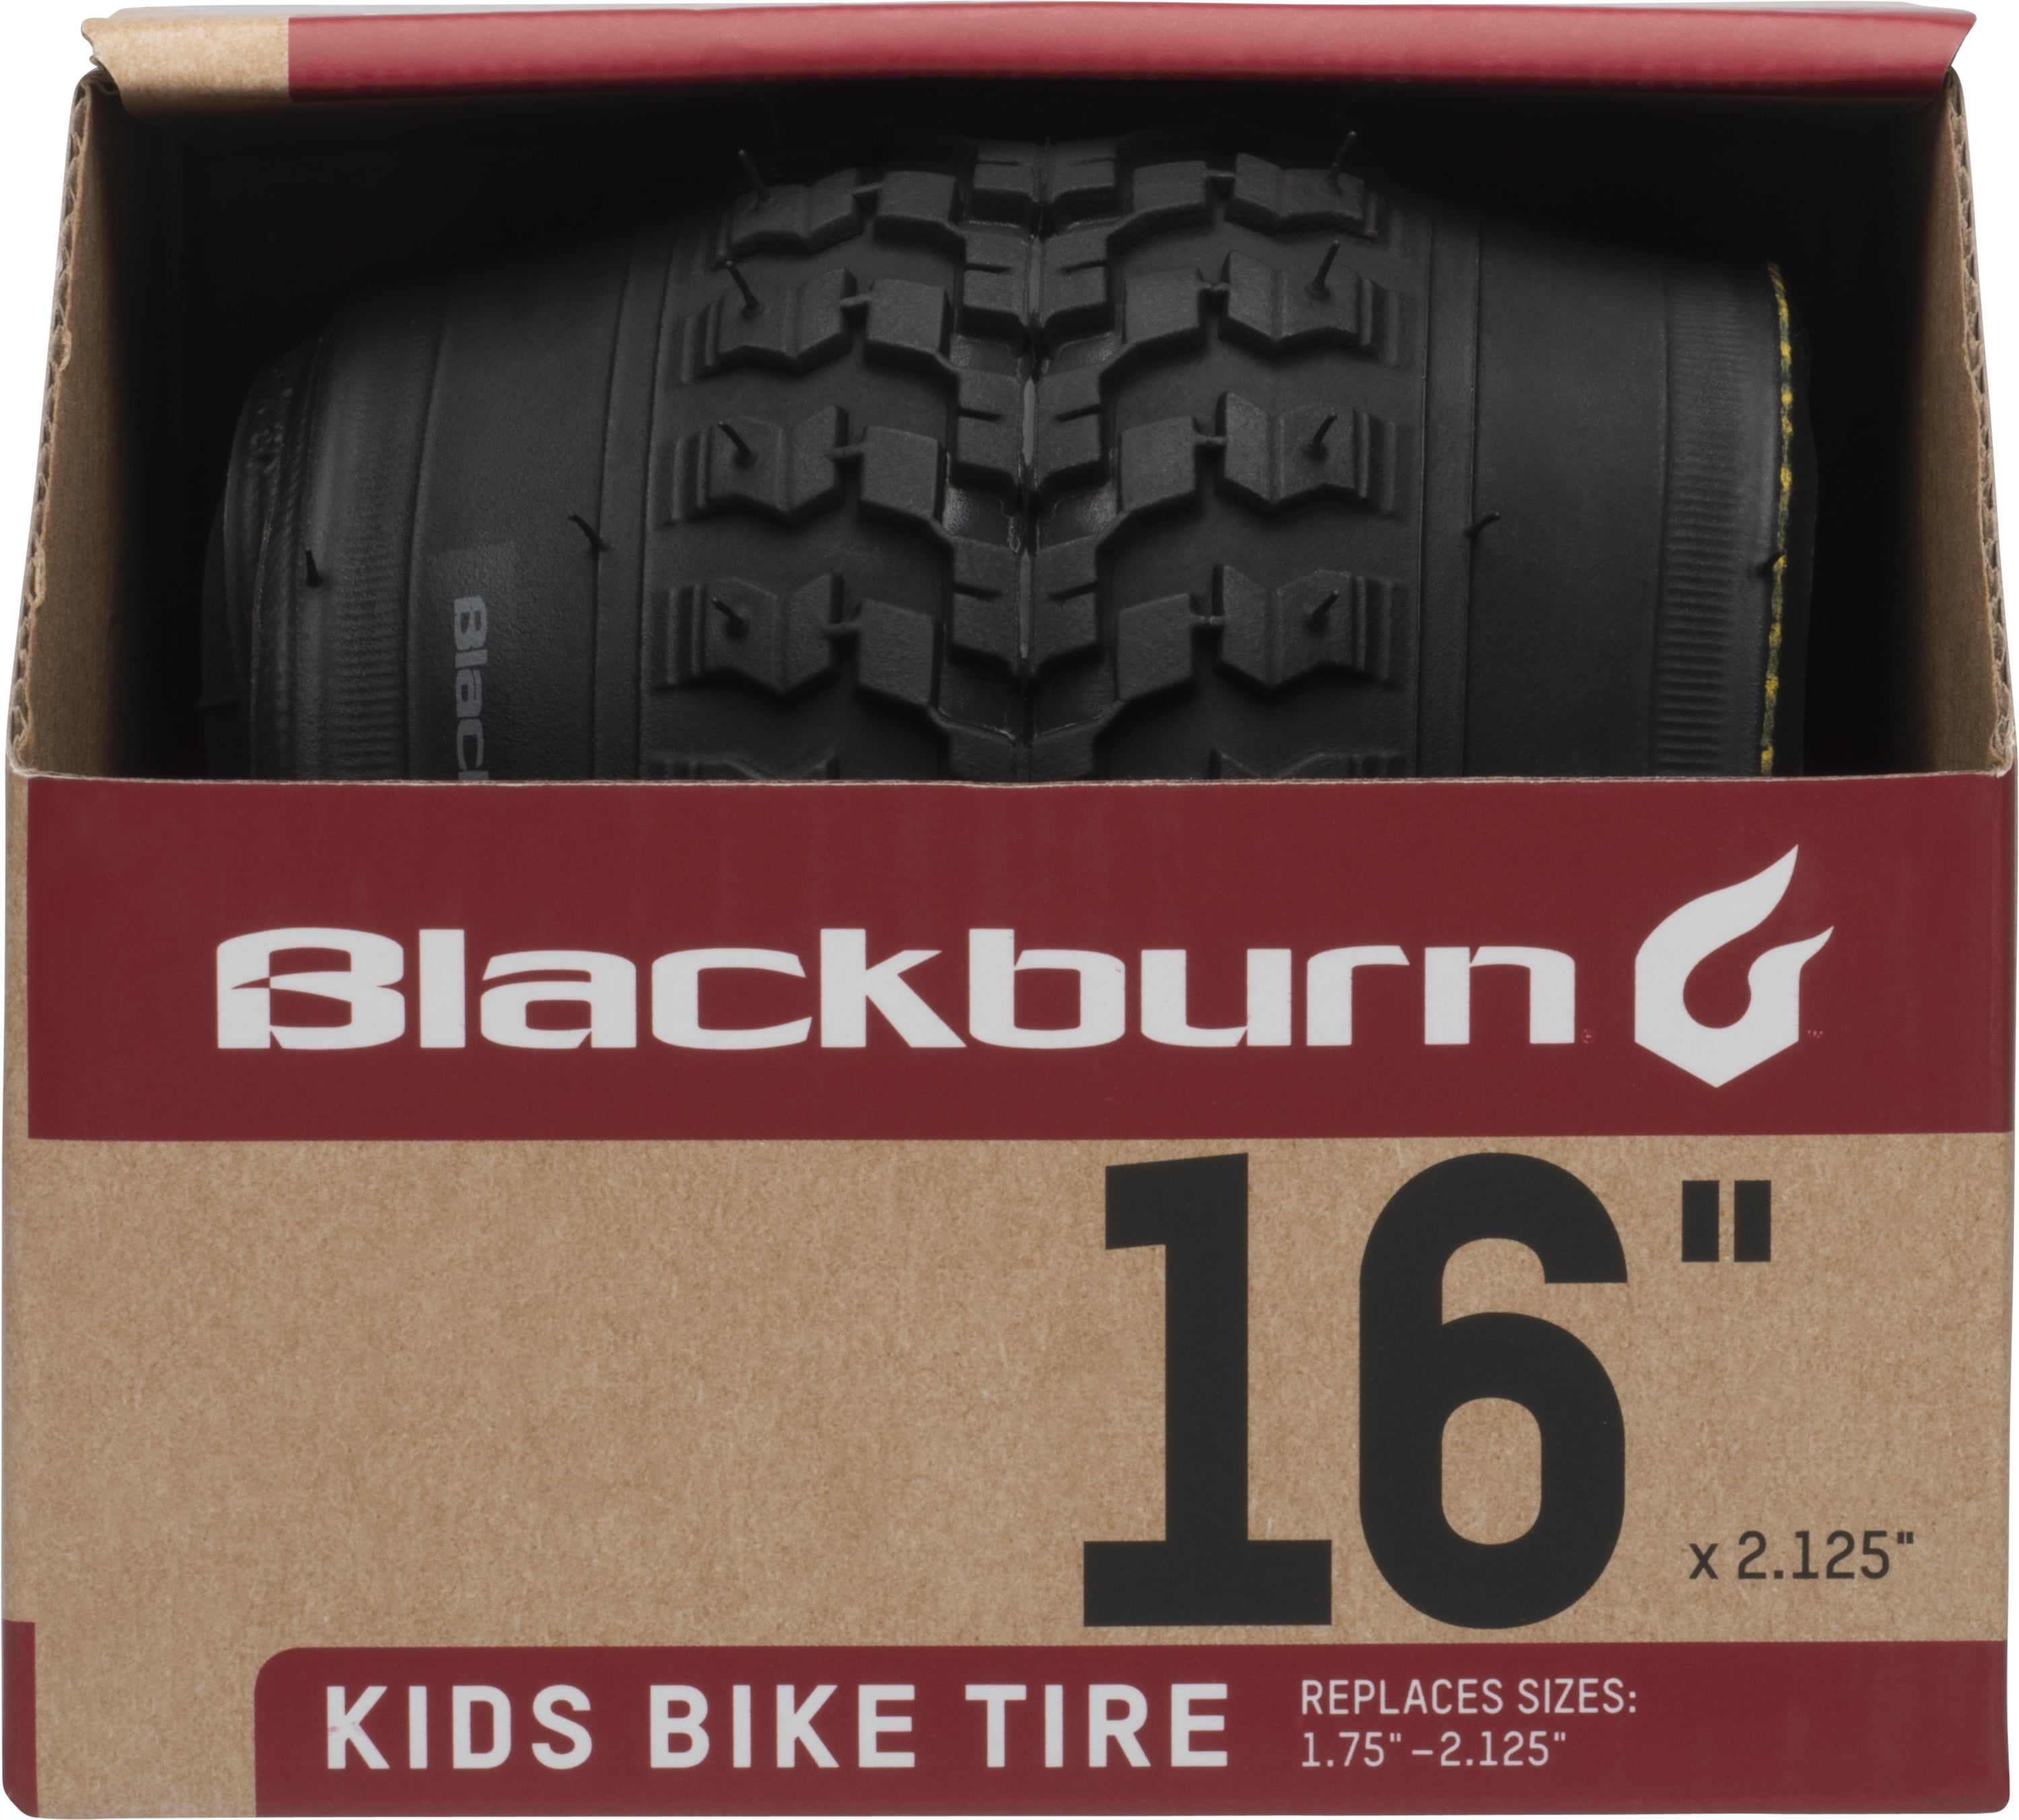 Bell Kids Bike Tire White 16" x 2.125" Replaces 1.75"-2.125" 